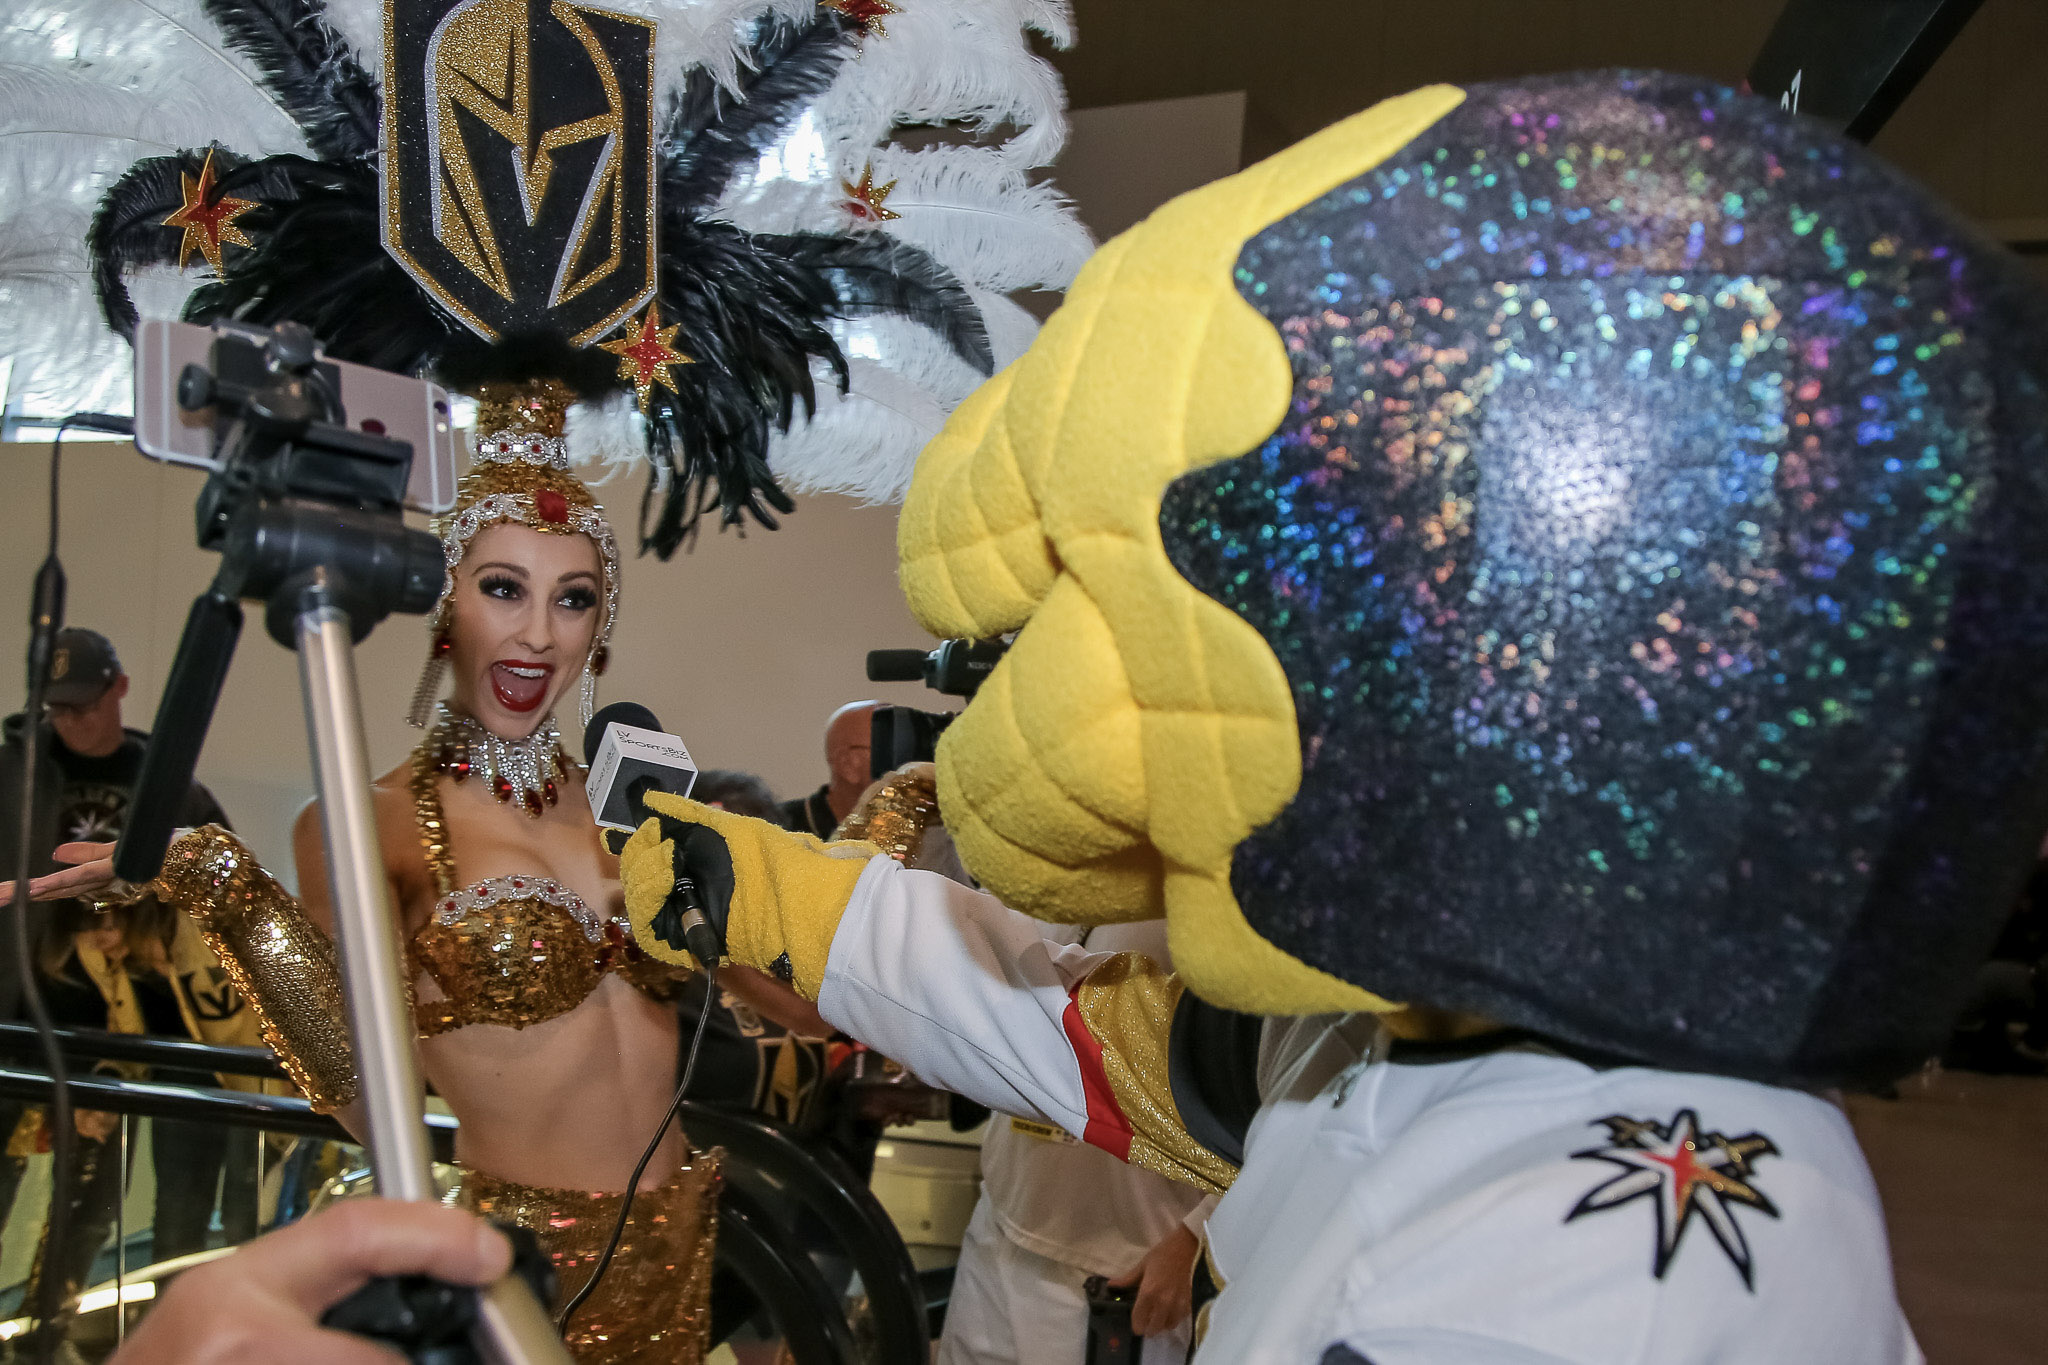 2019 Looks Like 2018 for Golden Knights: Another 18,300 Plus Crowd